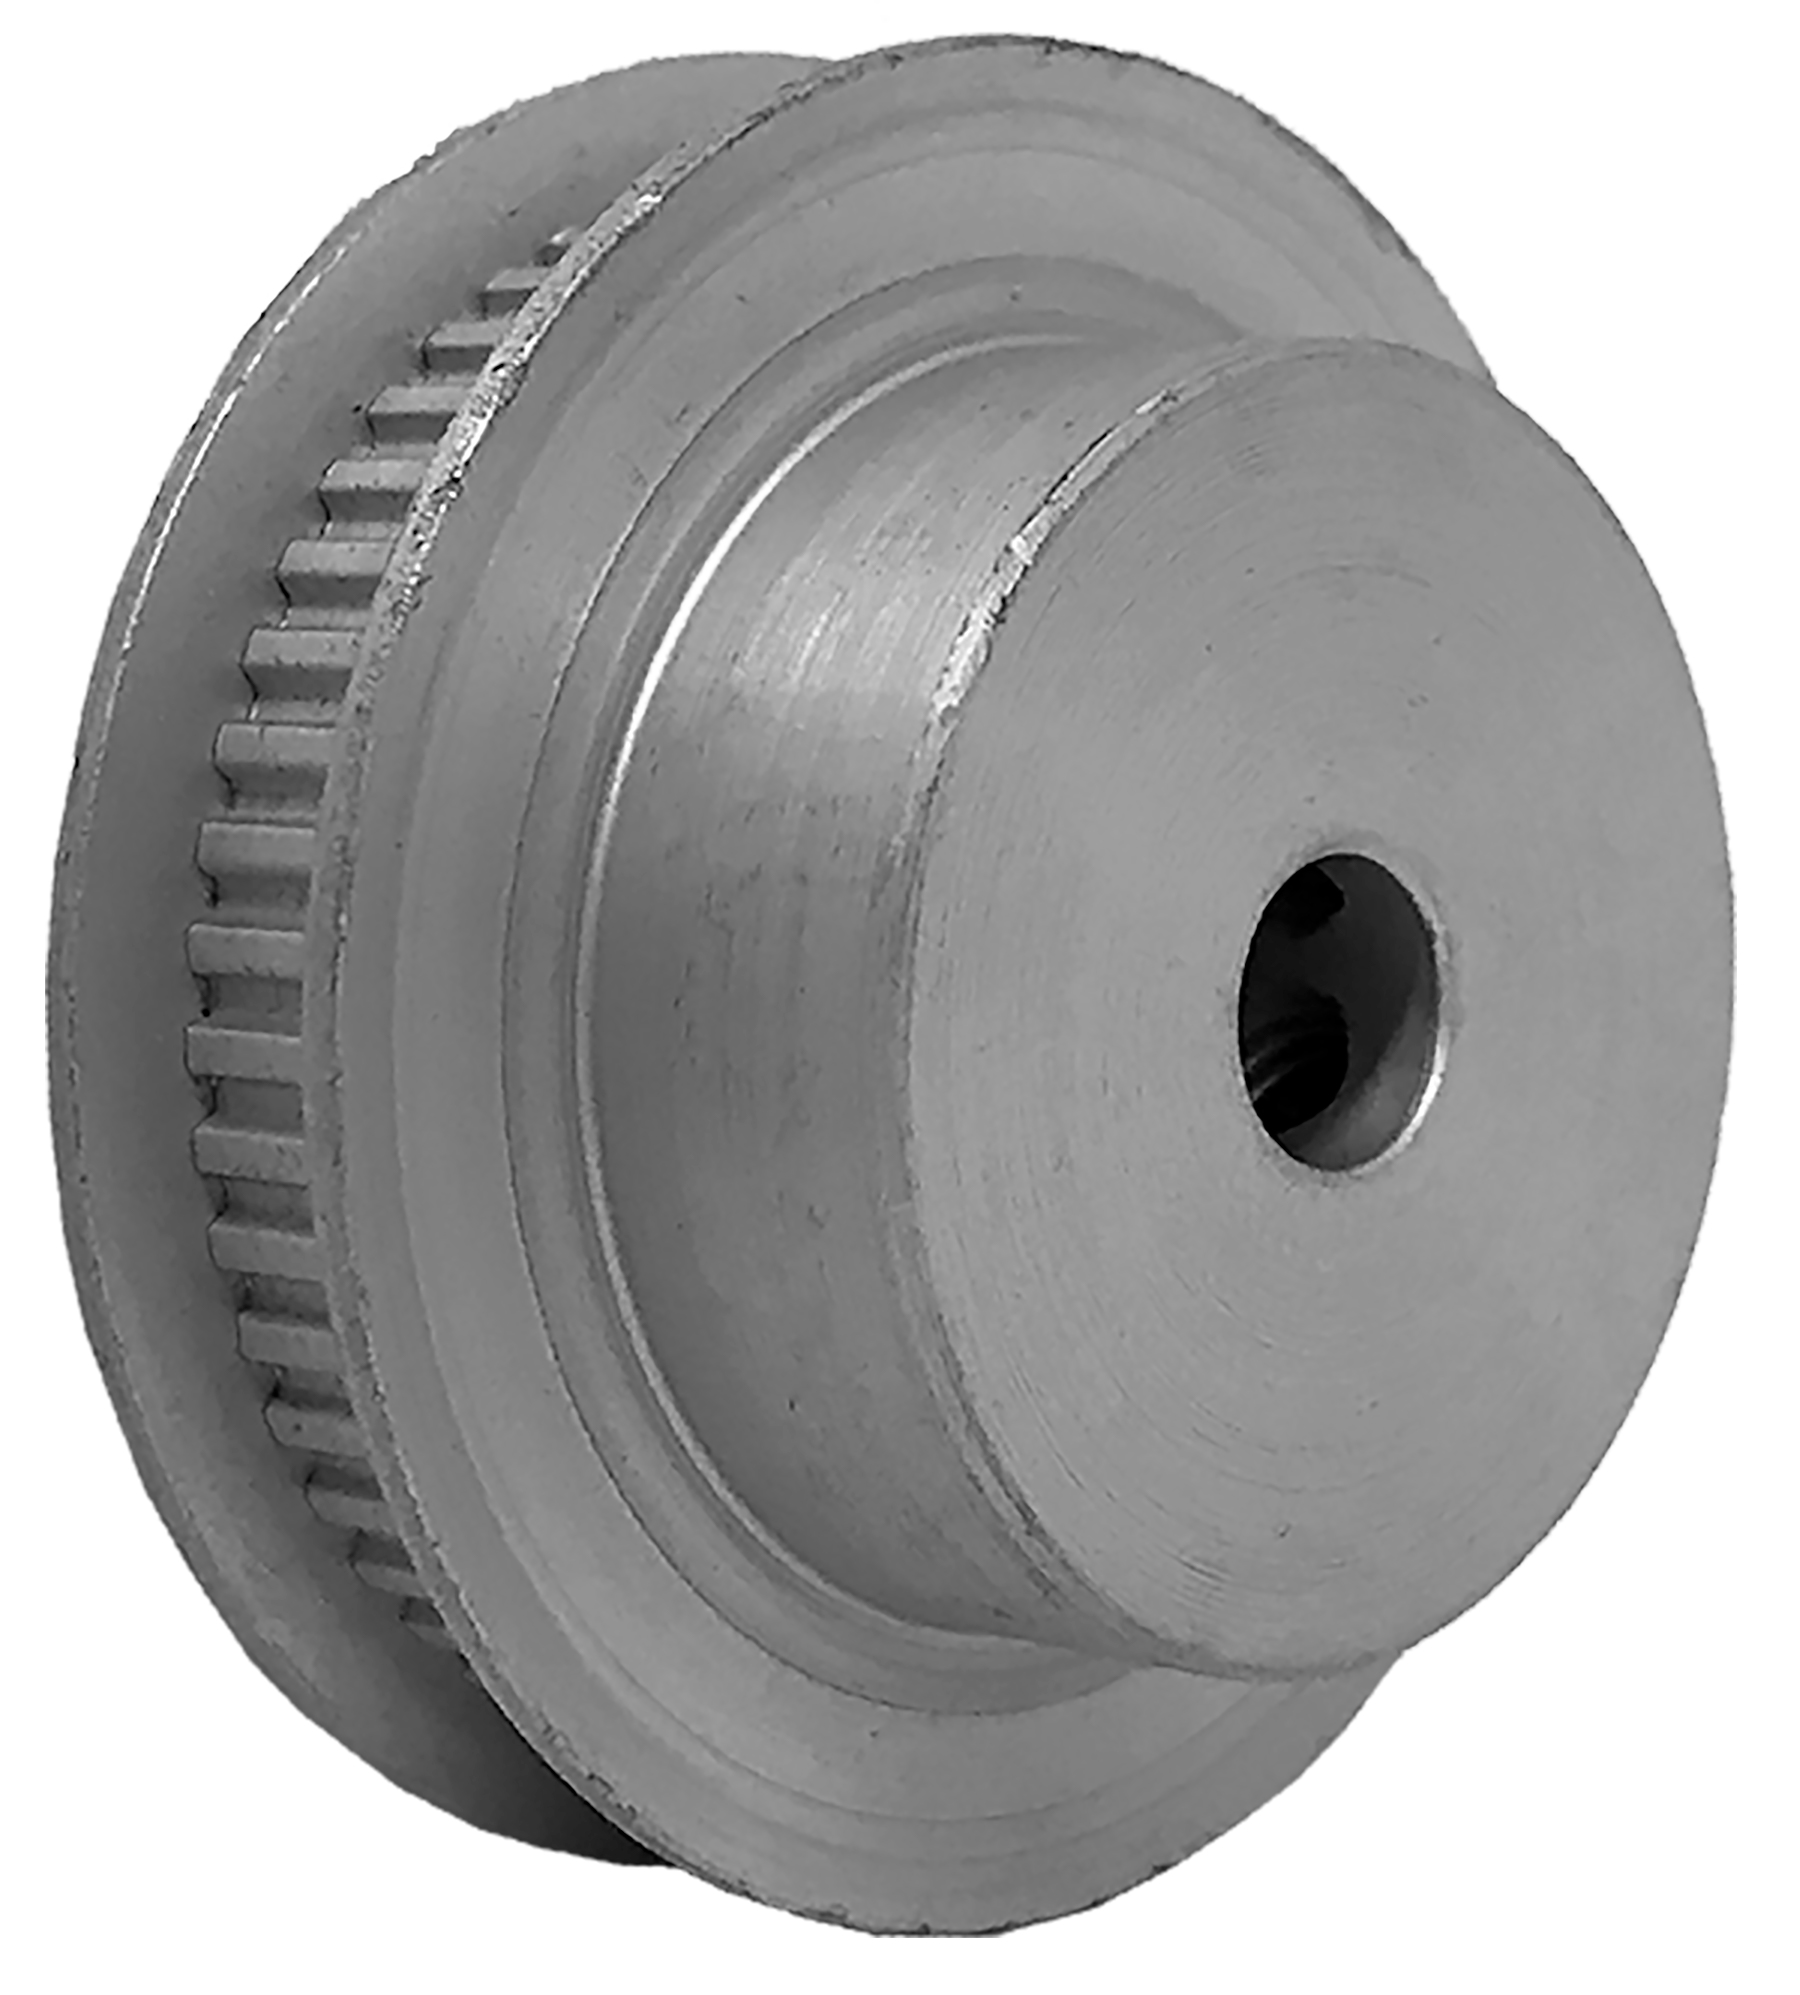 54LT187-6FA3 - Aluminum Imperial Pitch Pulleys